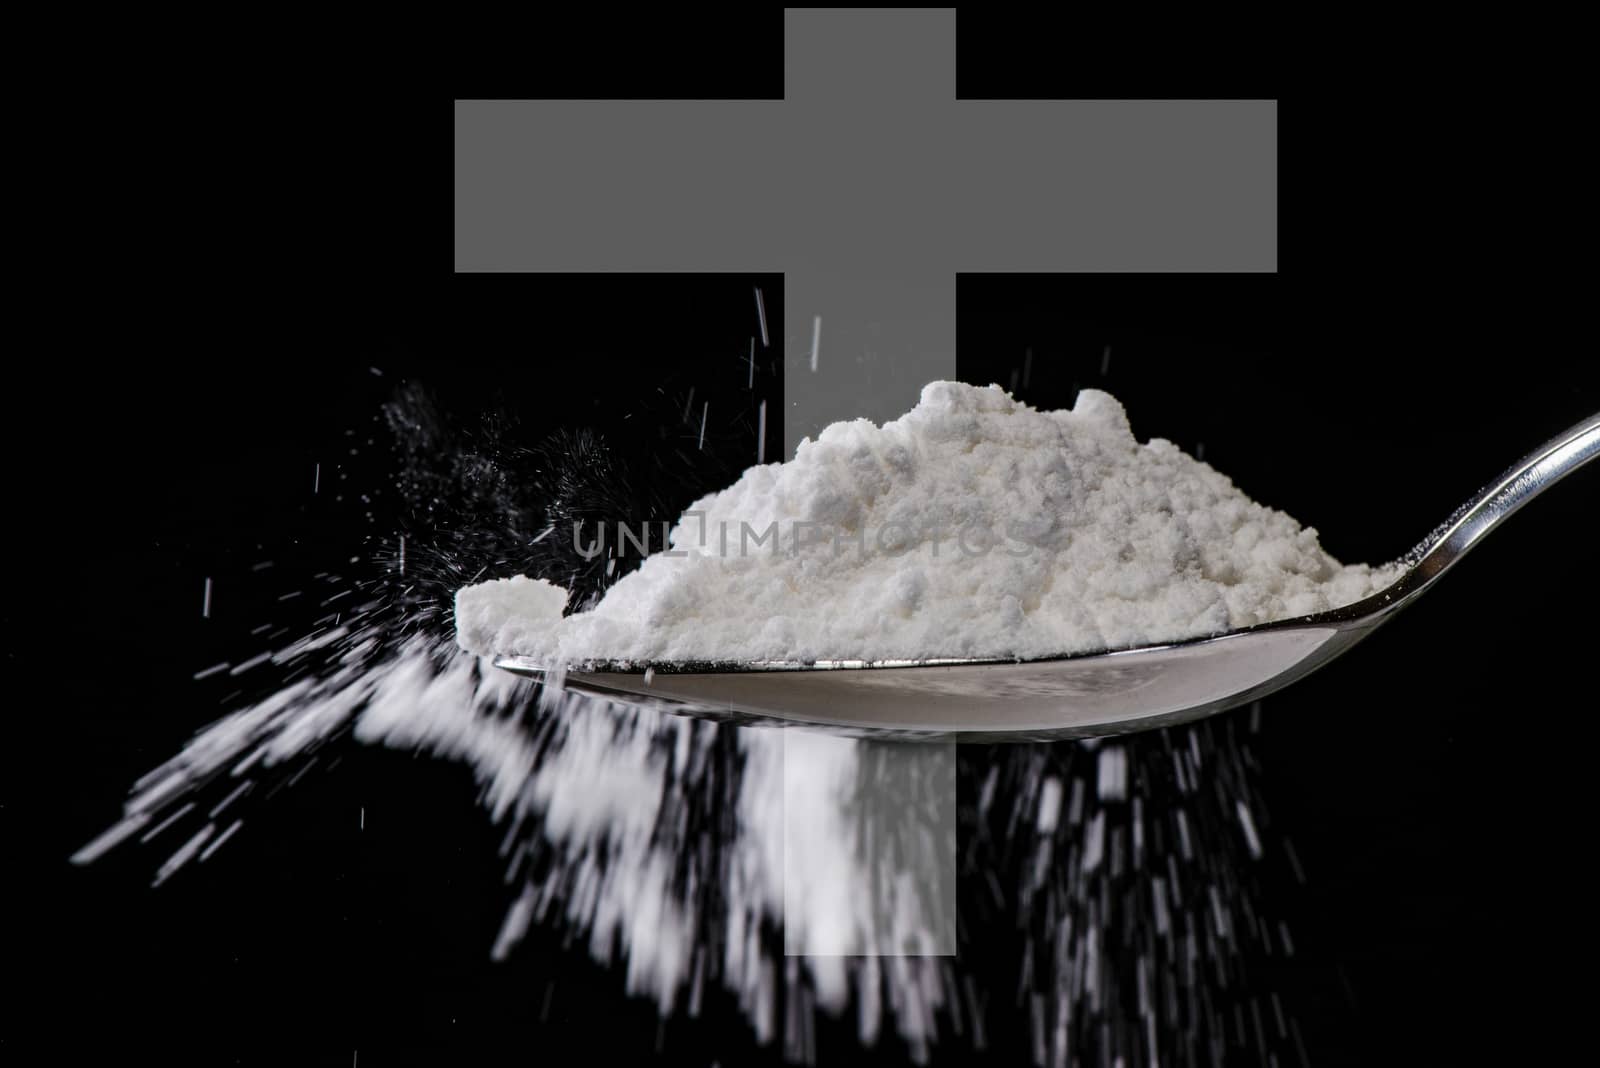 white powder in spoon like drug or medicine with a cross in background as sign for death